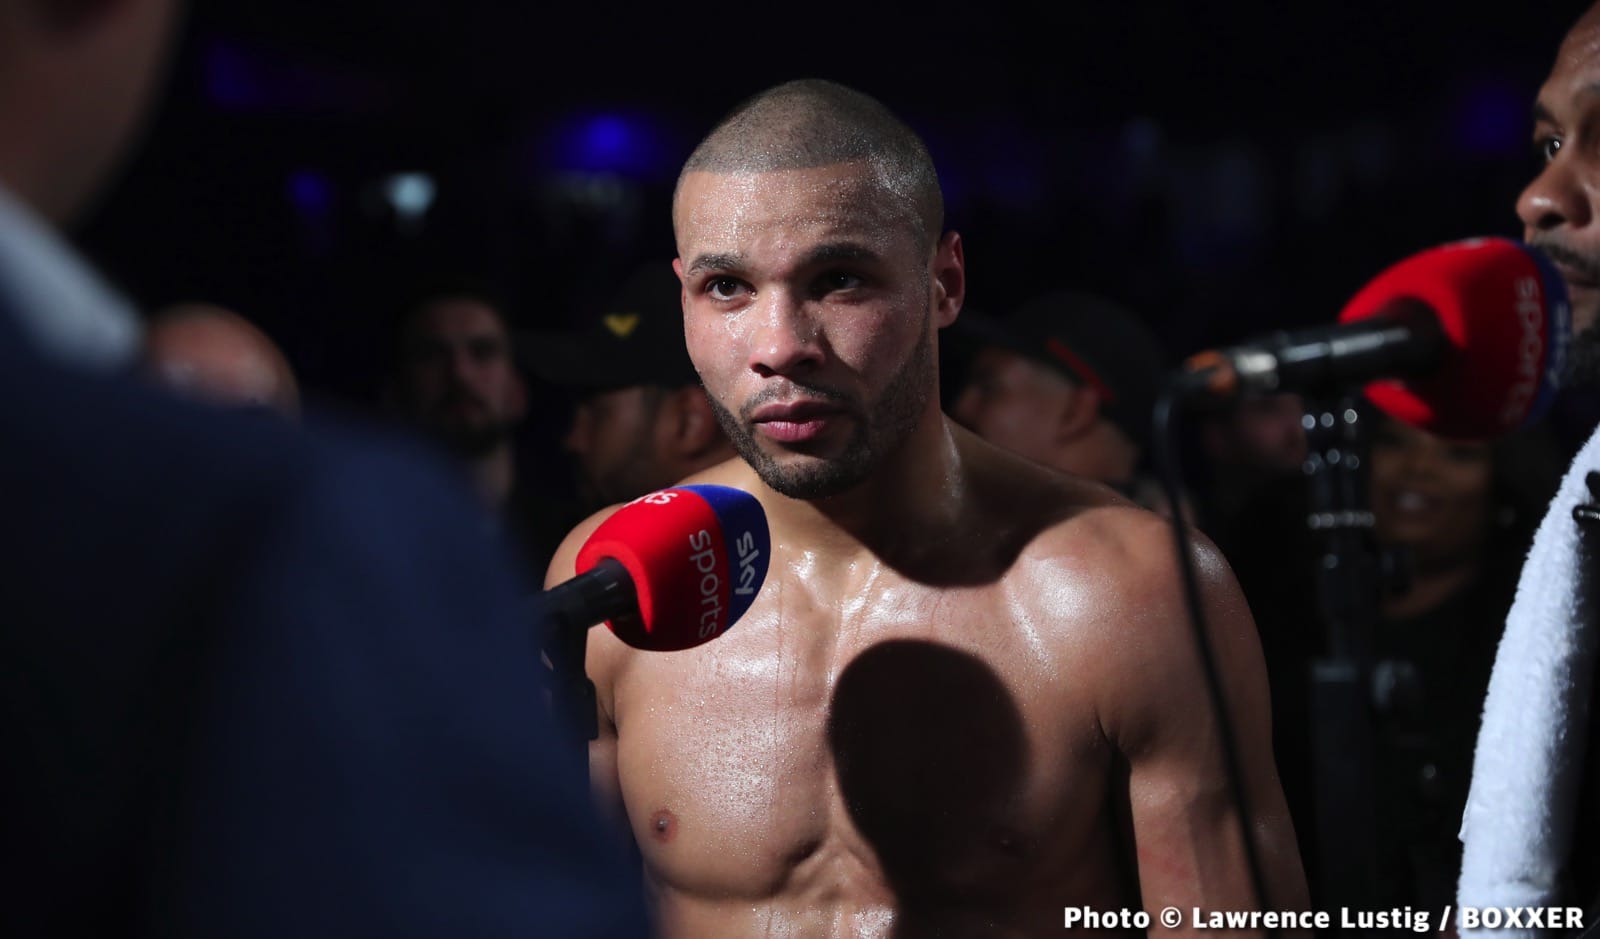 Image: Chris Eubank Jr Says He Will Obliterate Liam Williams